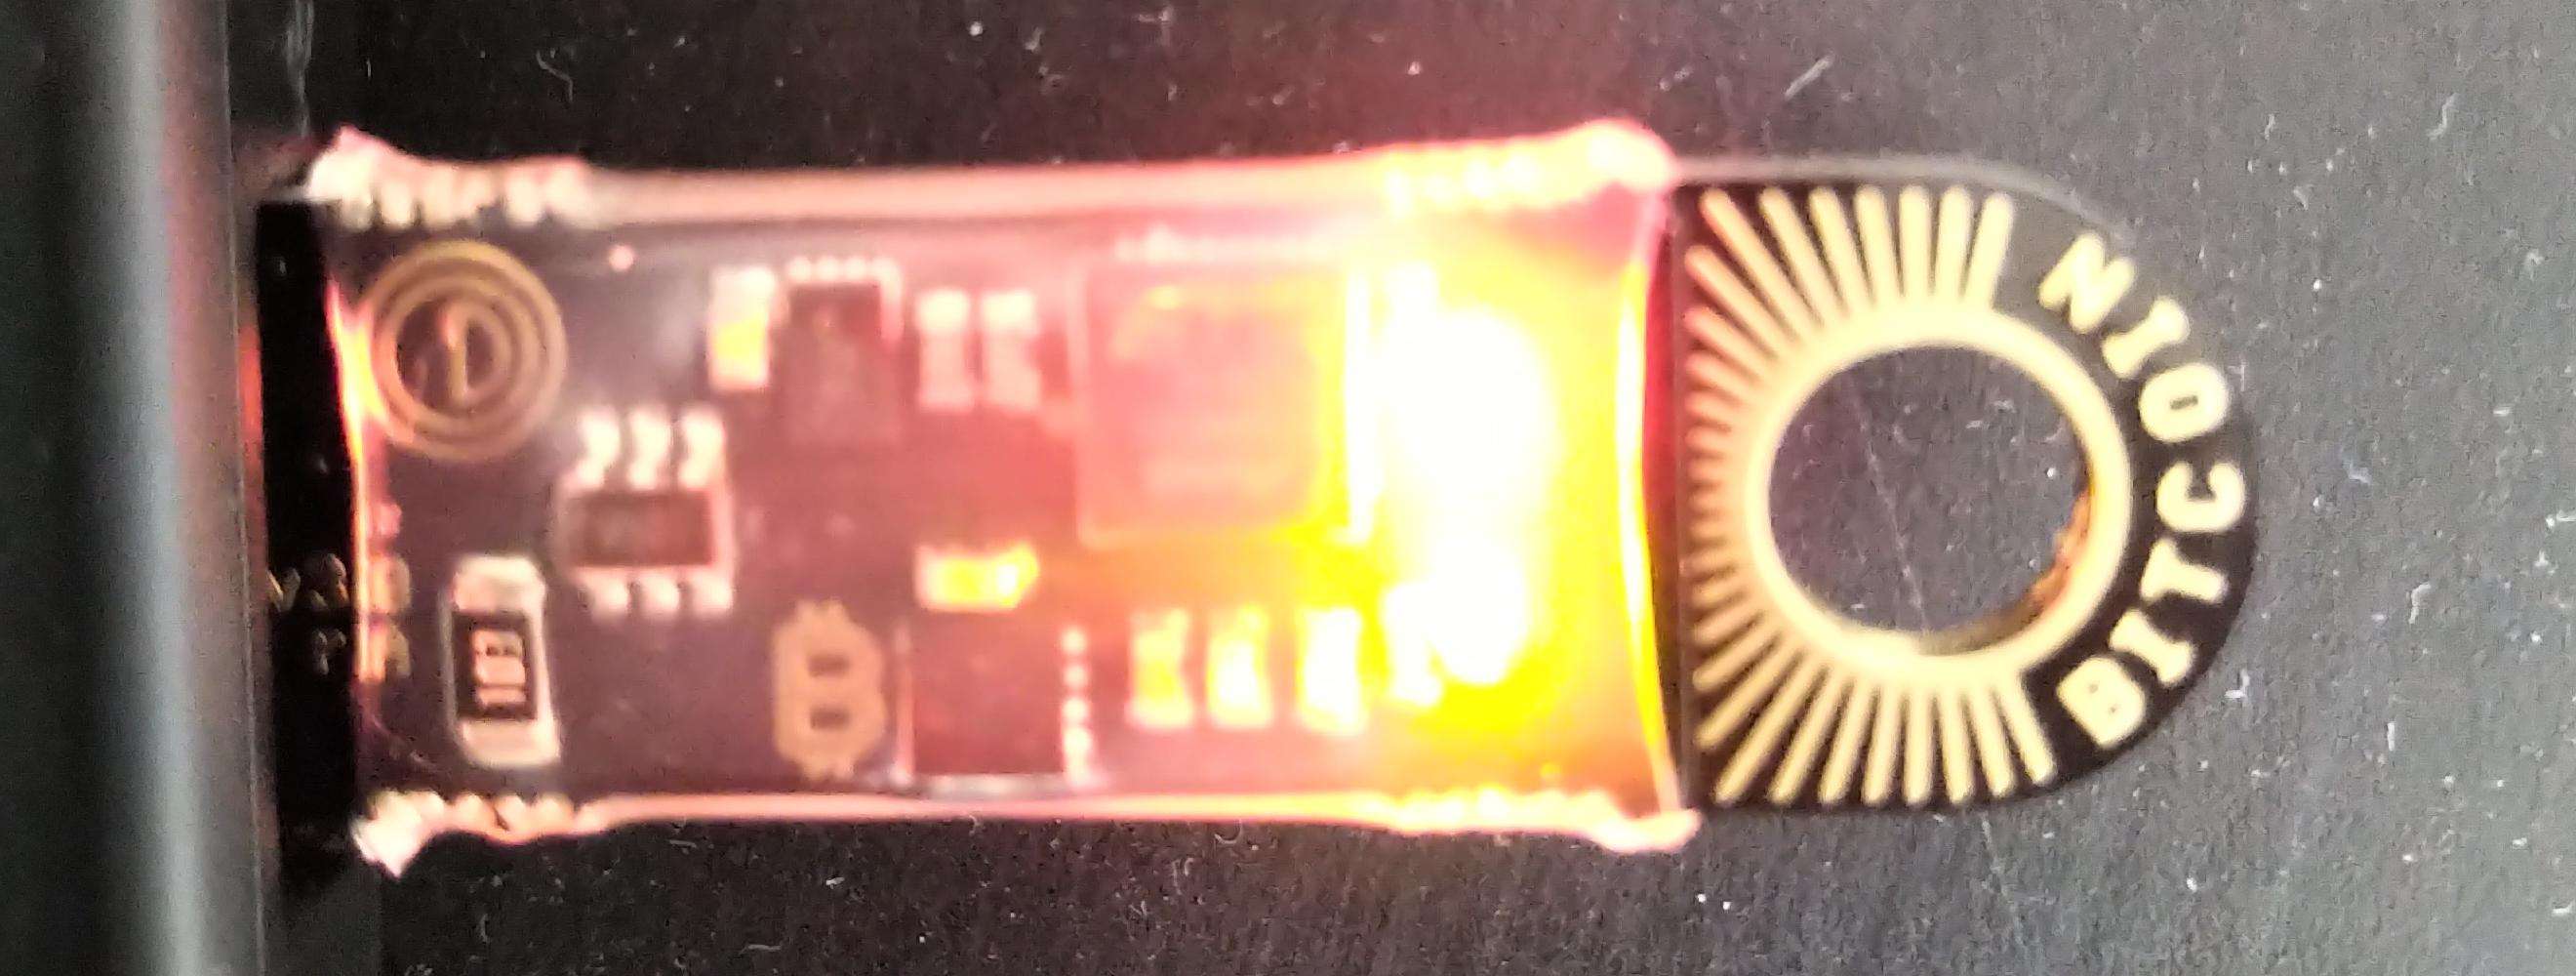 Opendime Bitcoin Wallet Set Up Step 0 flashing red light LED